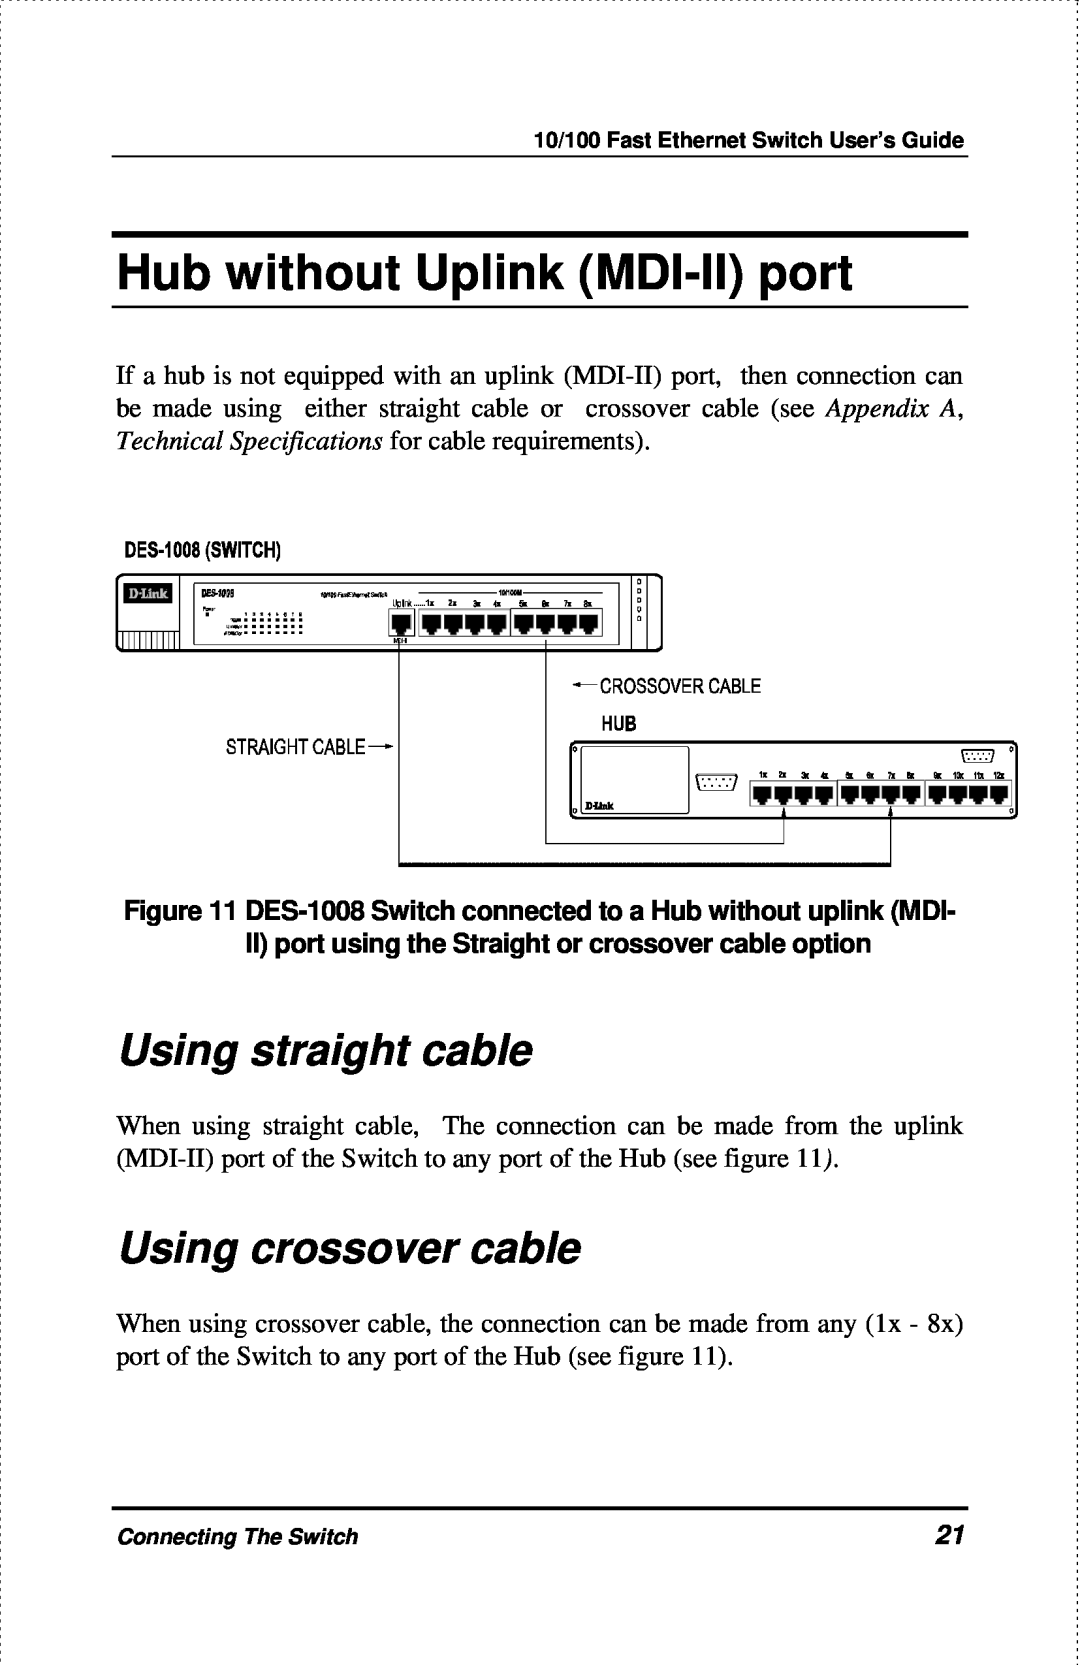 D-Link DES-1004 manual Hub without Uplink MDI-II port, Using straight cable, Using crossover cable 